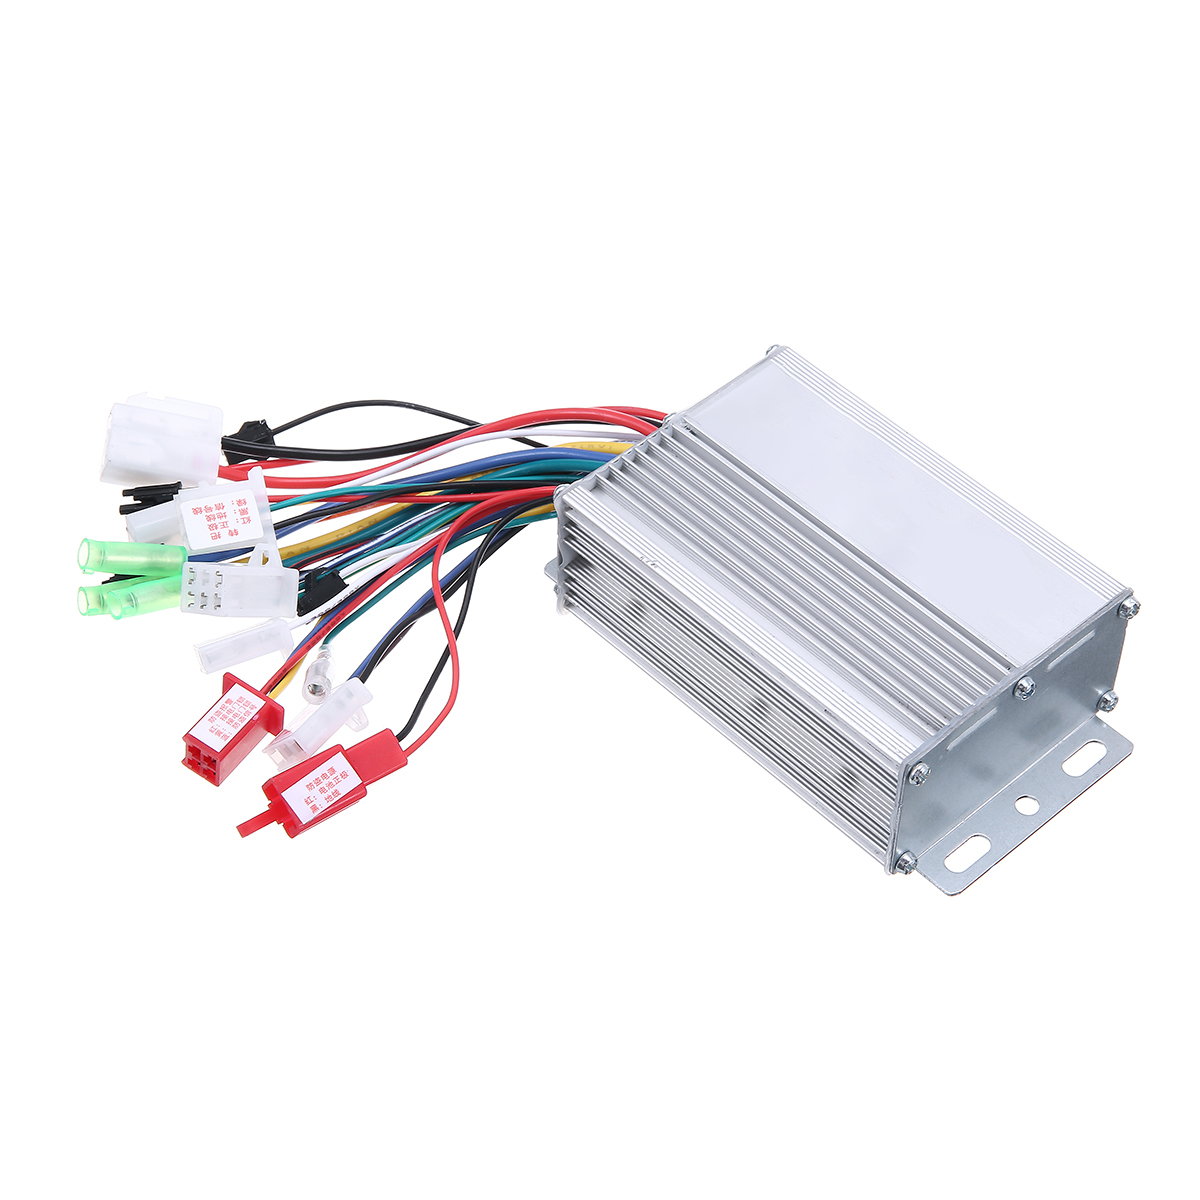 DC 36V/48V 350W DC Motor Controller Electric Bicycle E-bike Scooter Brushless Control with Aluminium Casing